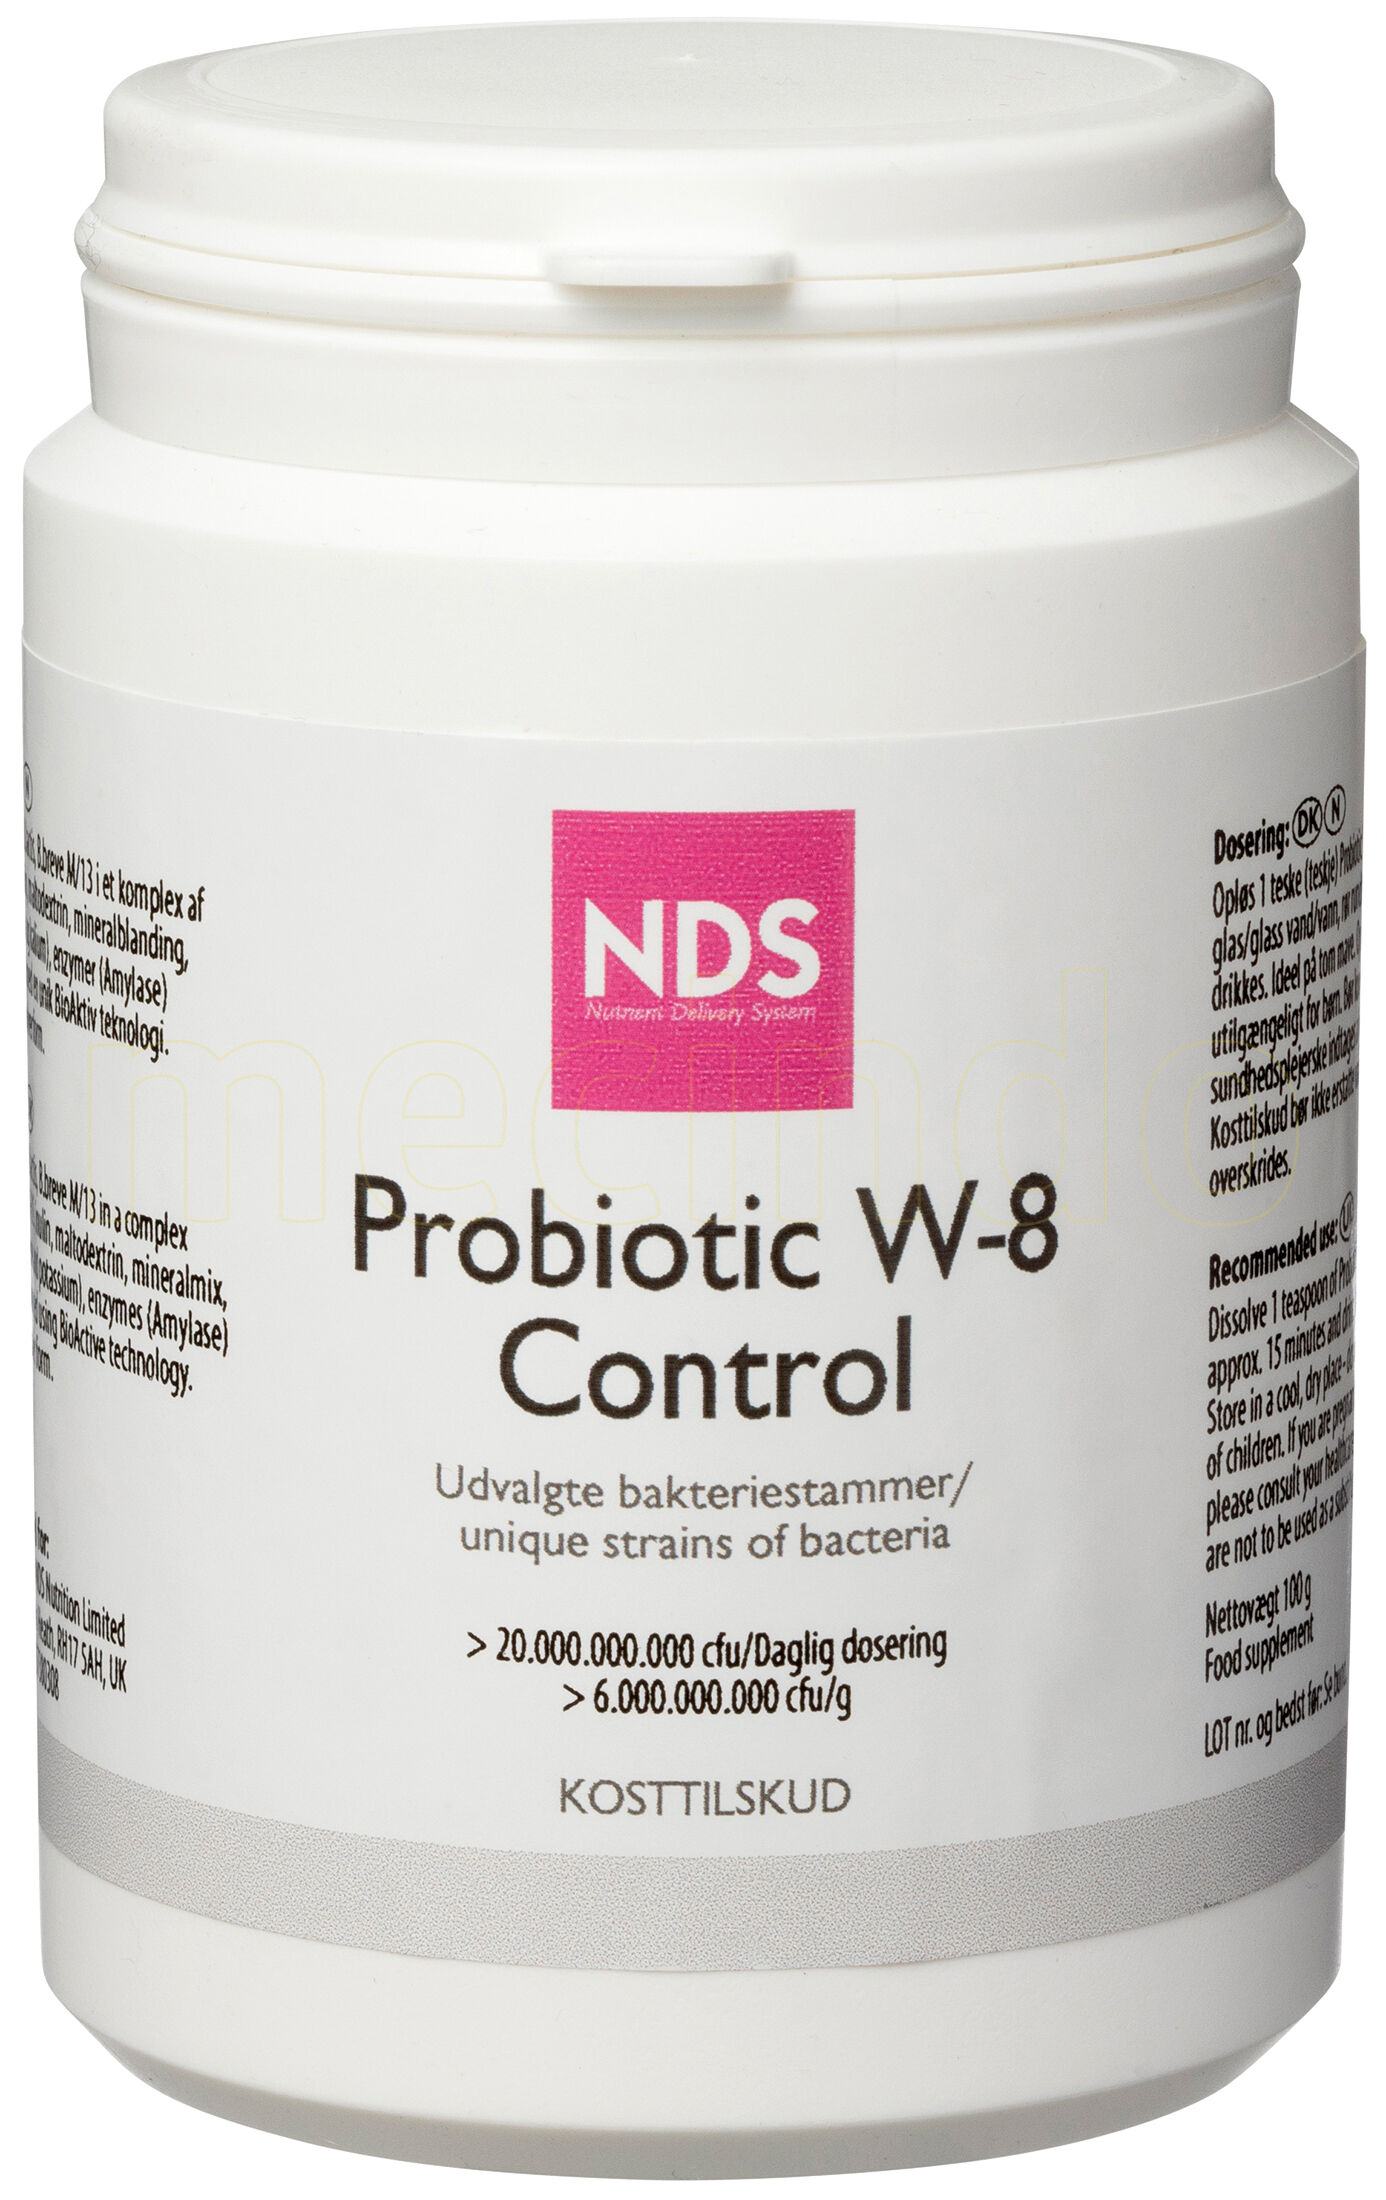 NDS Probiotic W-8 Control - 100 g